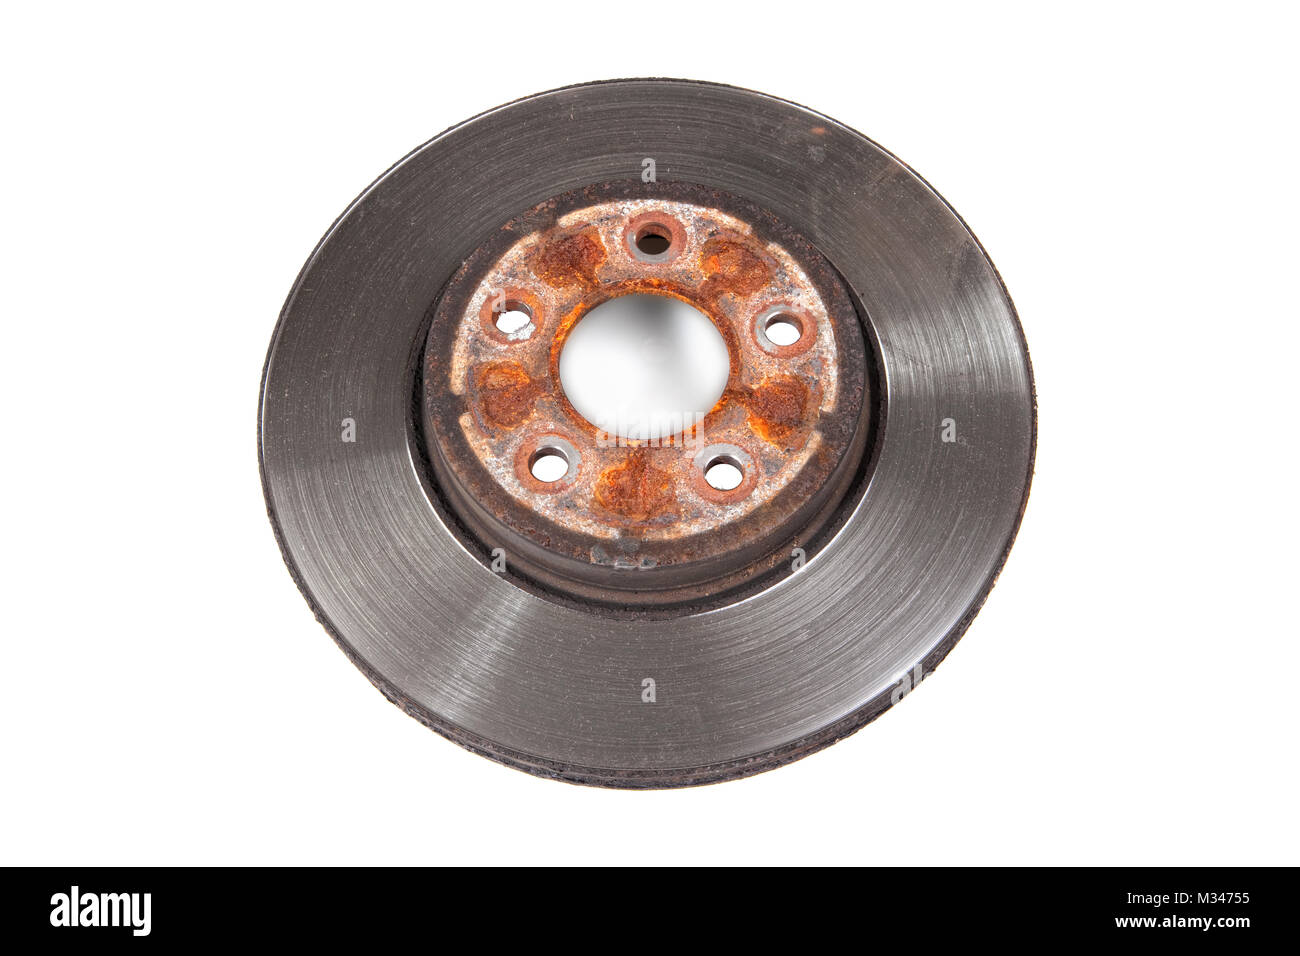 Close-up of an old disc brake on a car Stock Photo